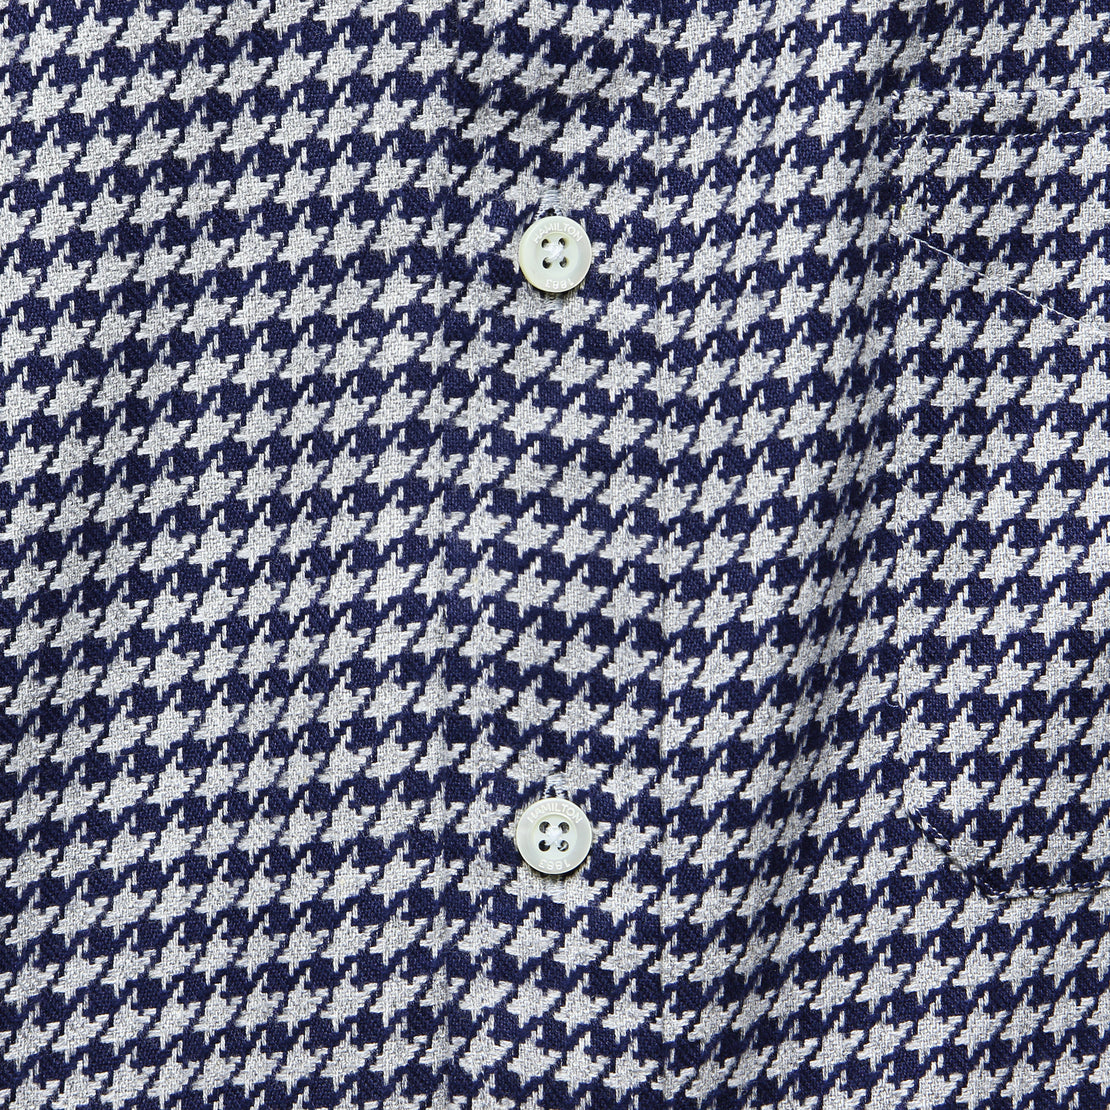 Houndstooth Shirt - Grey/Navy - Hamilton Shirt Co. - STAG Provisions - Tops - L/S Woven - Other Pattern